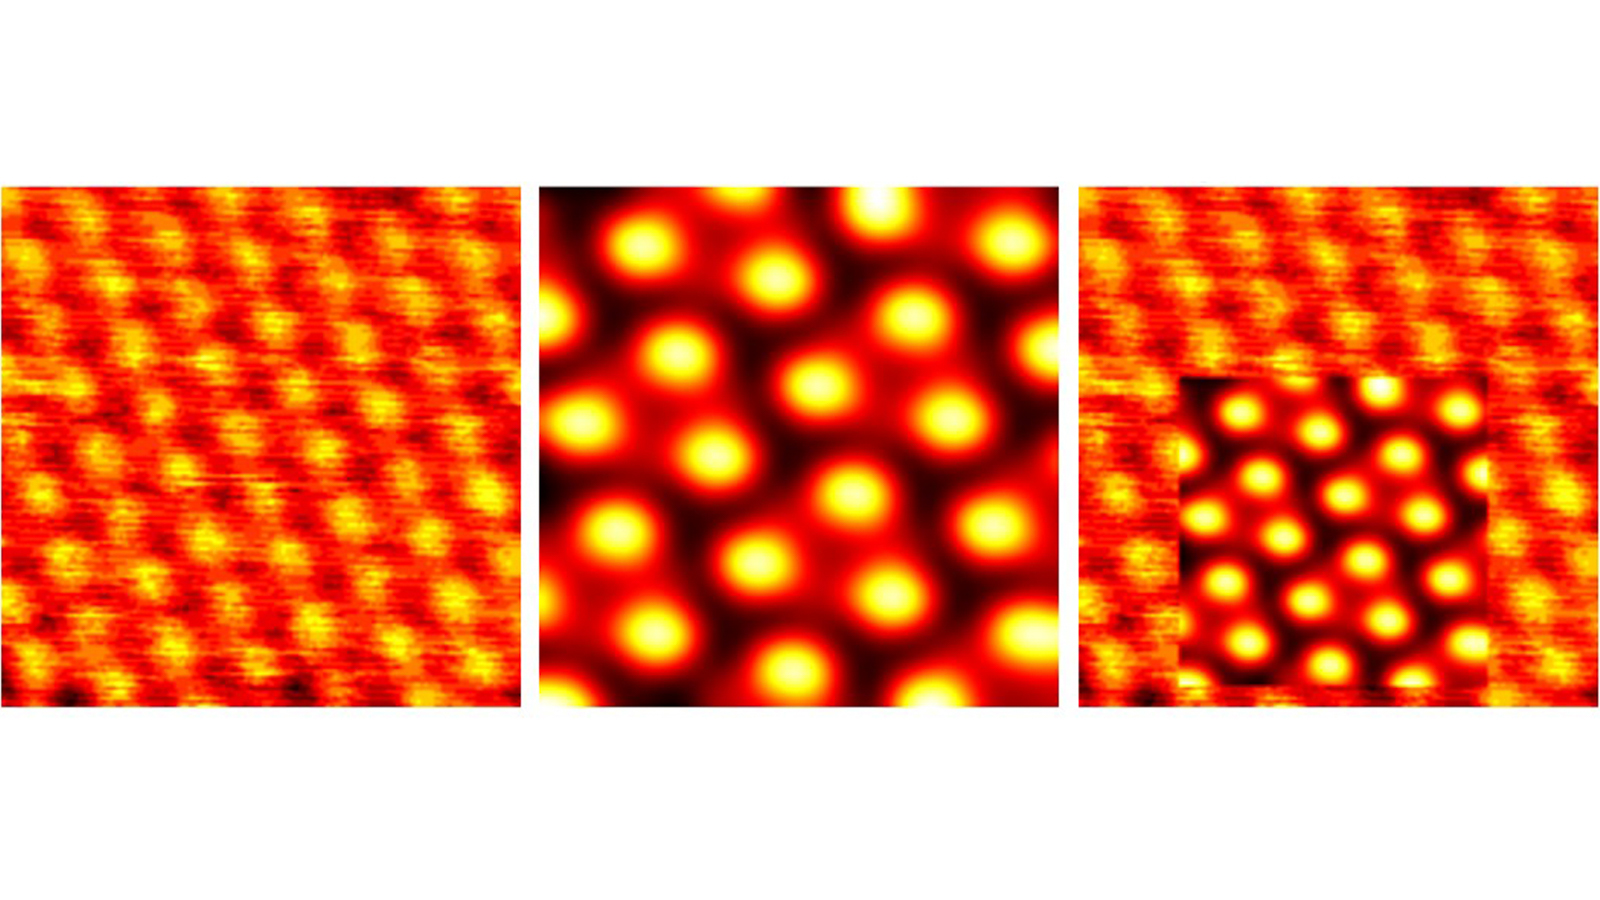 FANTASTX will use computer vision and AI to find matches (right) between simulated (middle) scanning tunneling microscopy images and experimental (left) images. (Image by Chaitanya Kolluru, Rui Zhang, Liang Li and Jeff Guest, Argonne National Laboratory, and Eric Schwenker, Northwestern University.)